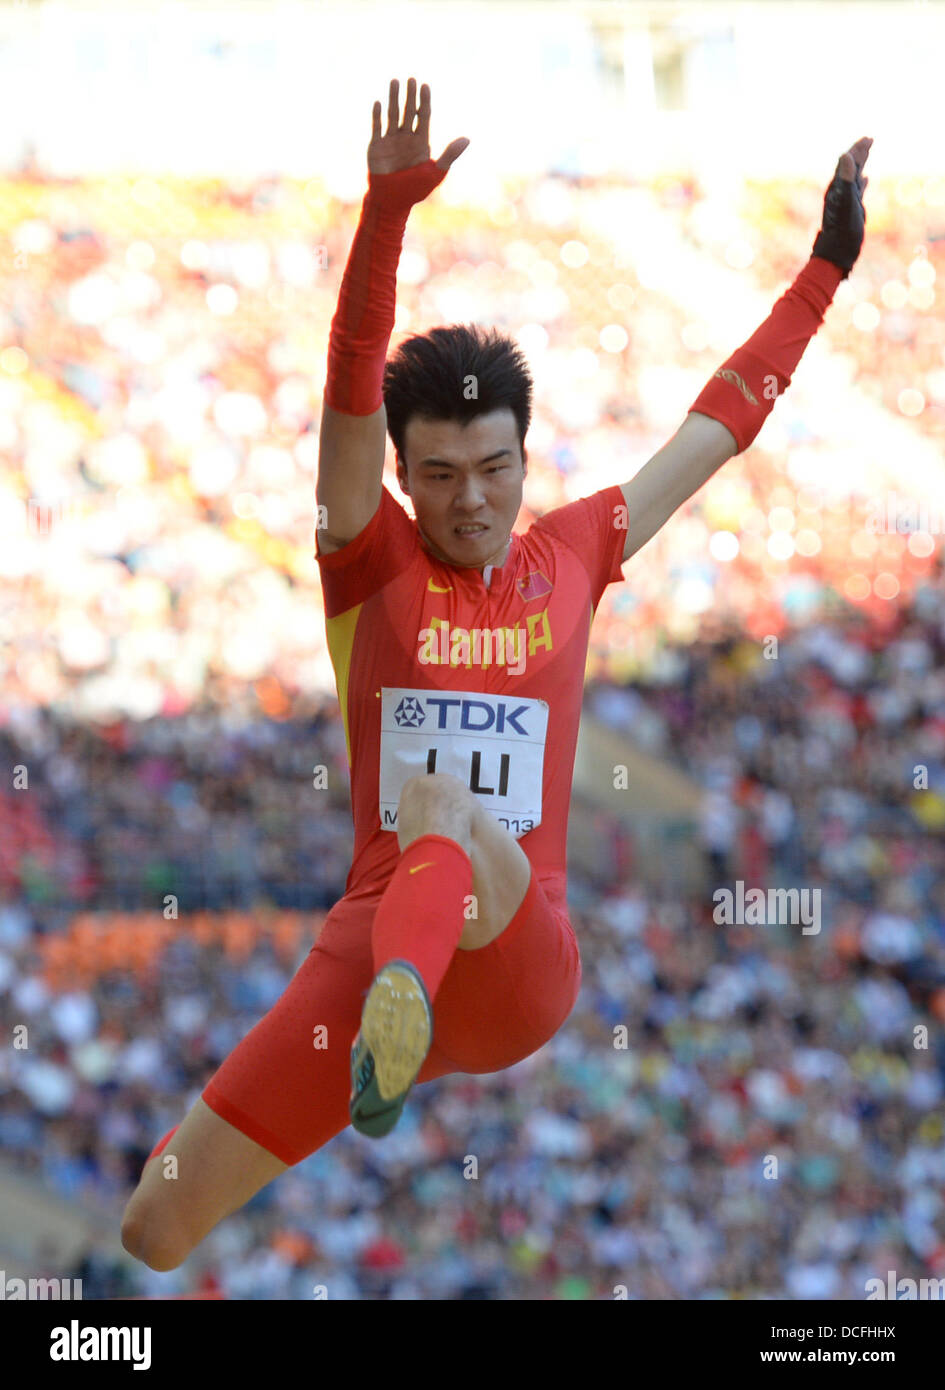 Moscow, Russia. 16th Aug, 2013. Jinzhe Li of China competes in the Men's Long Jump Final at the 14th IAAF World Championships in Athletics at Luzhniki Stadium in Moscow, Russia, 16 August 2013. Photo: Bernd Thissen/dpa/Alamy Live News Stock Photo